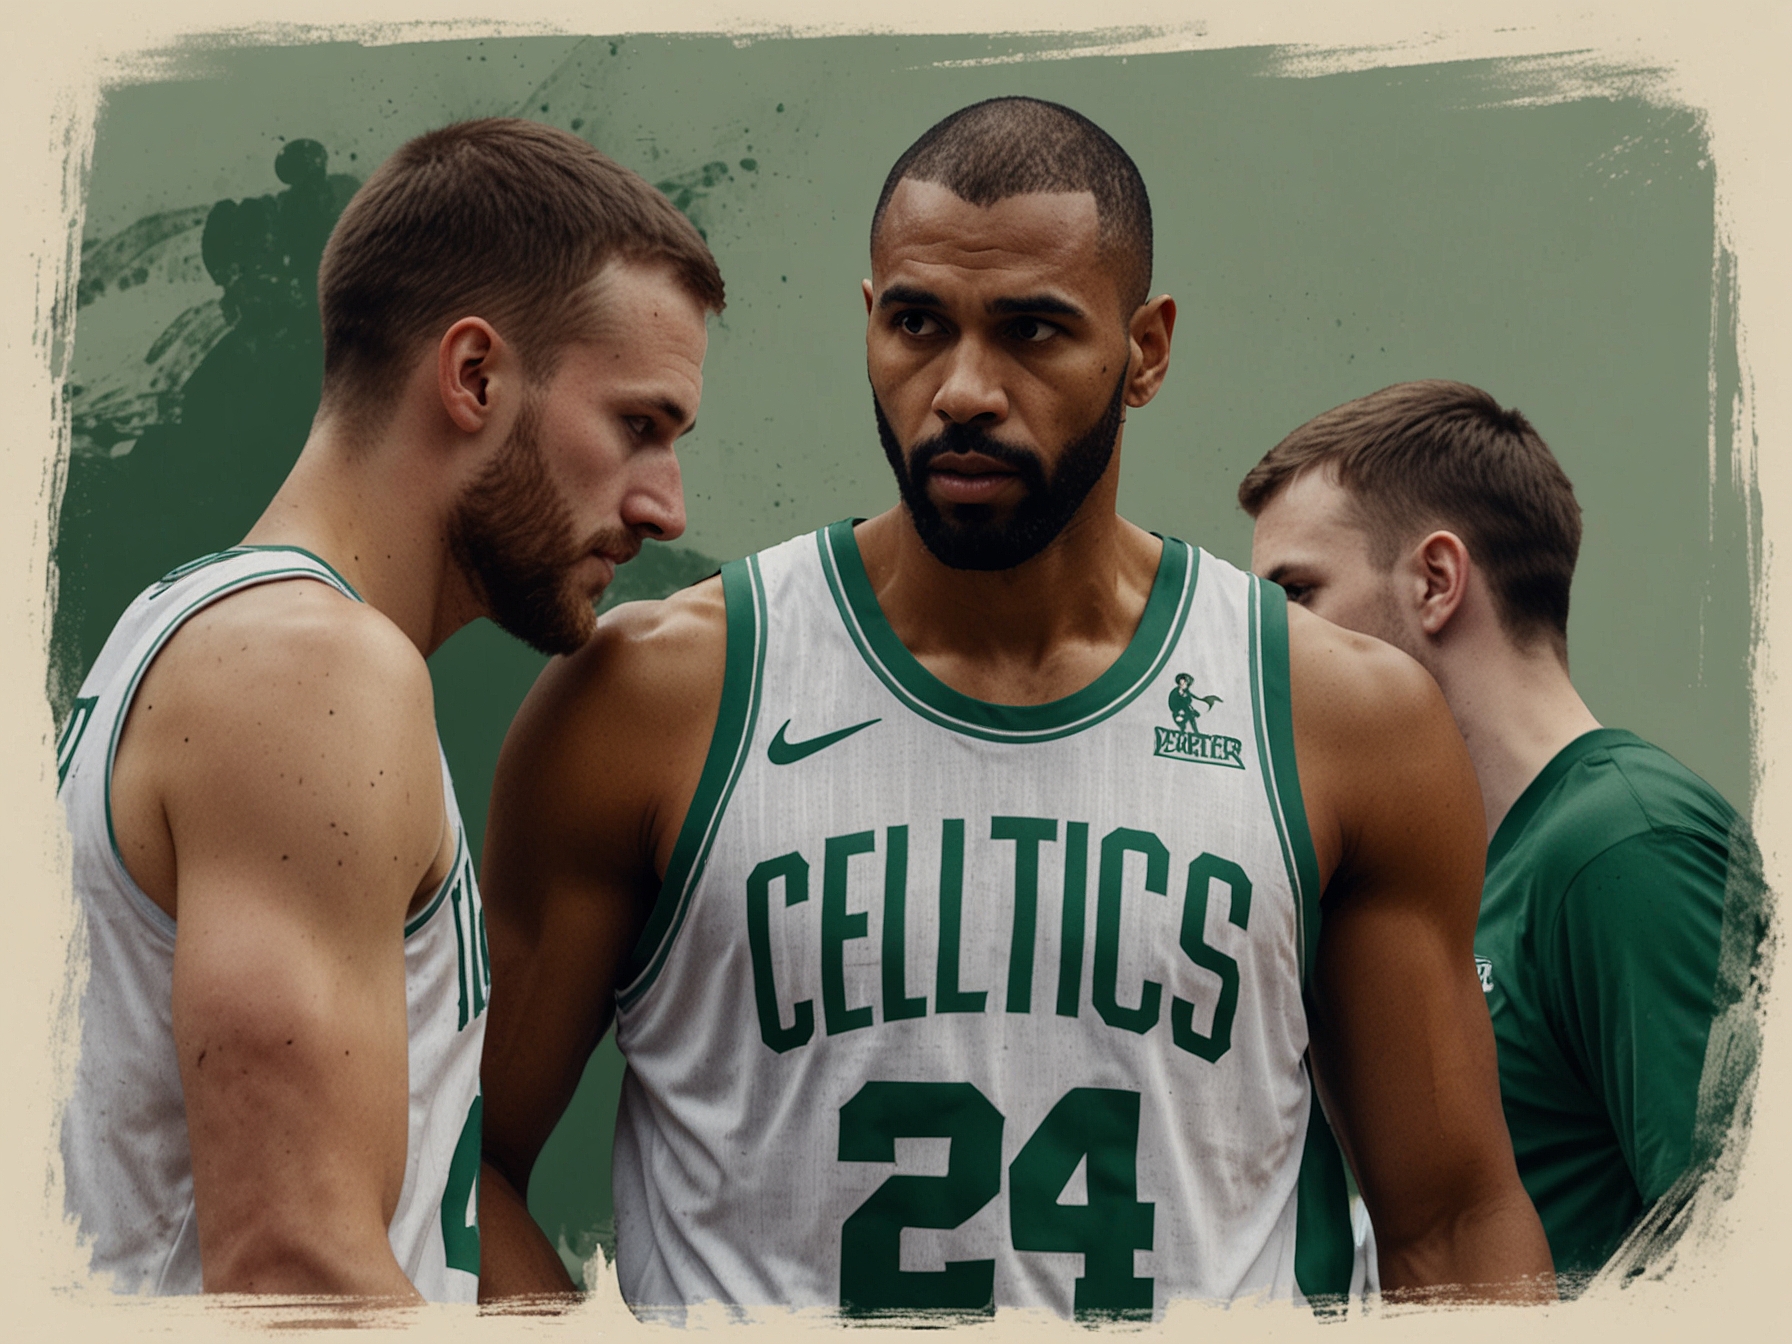 Boston Celtics coach Ime Udoka strategizing with the team in a huddle, highlighting the challenge of adapting to Porzingis' absence and redistributing roles among players for the upcoming season.